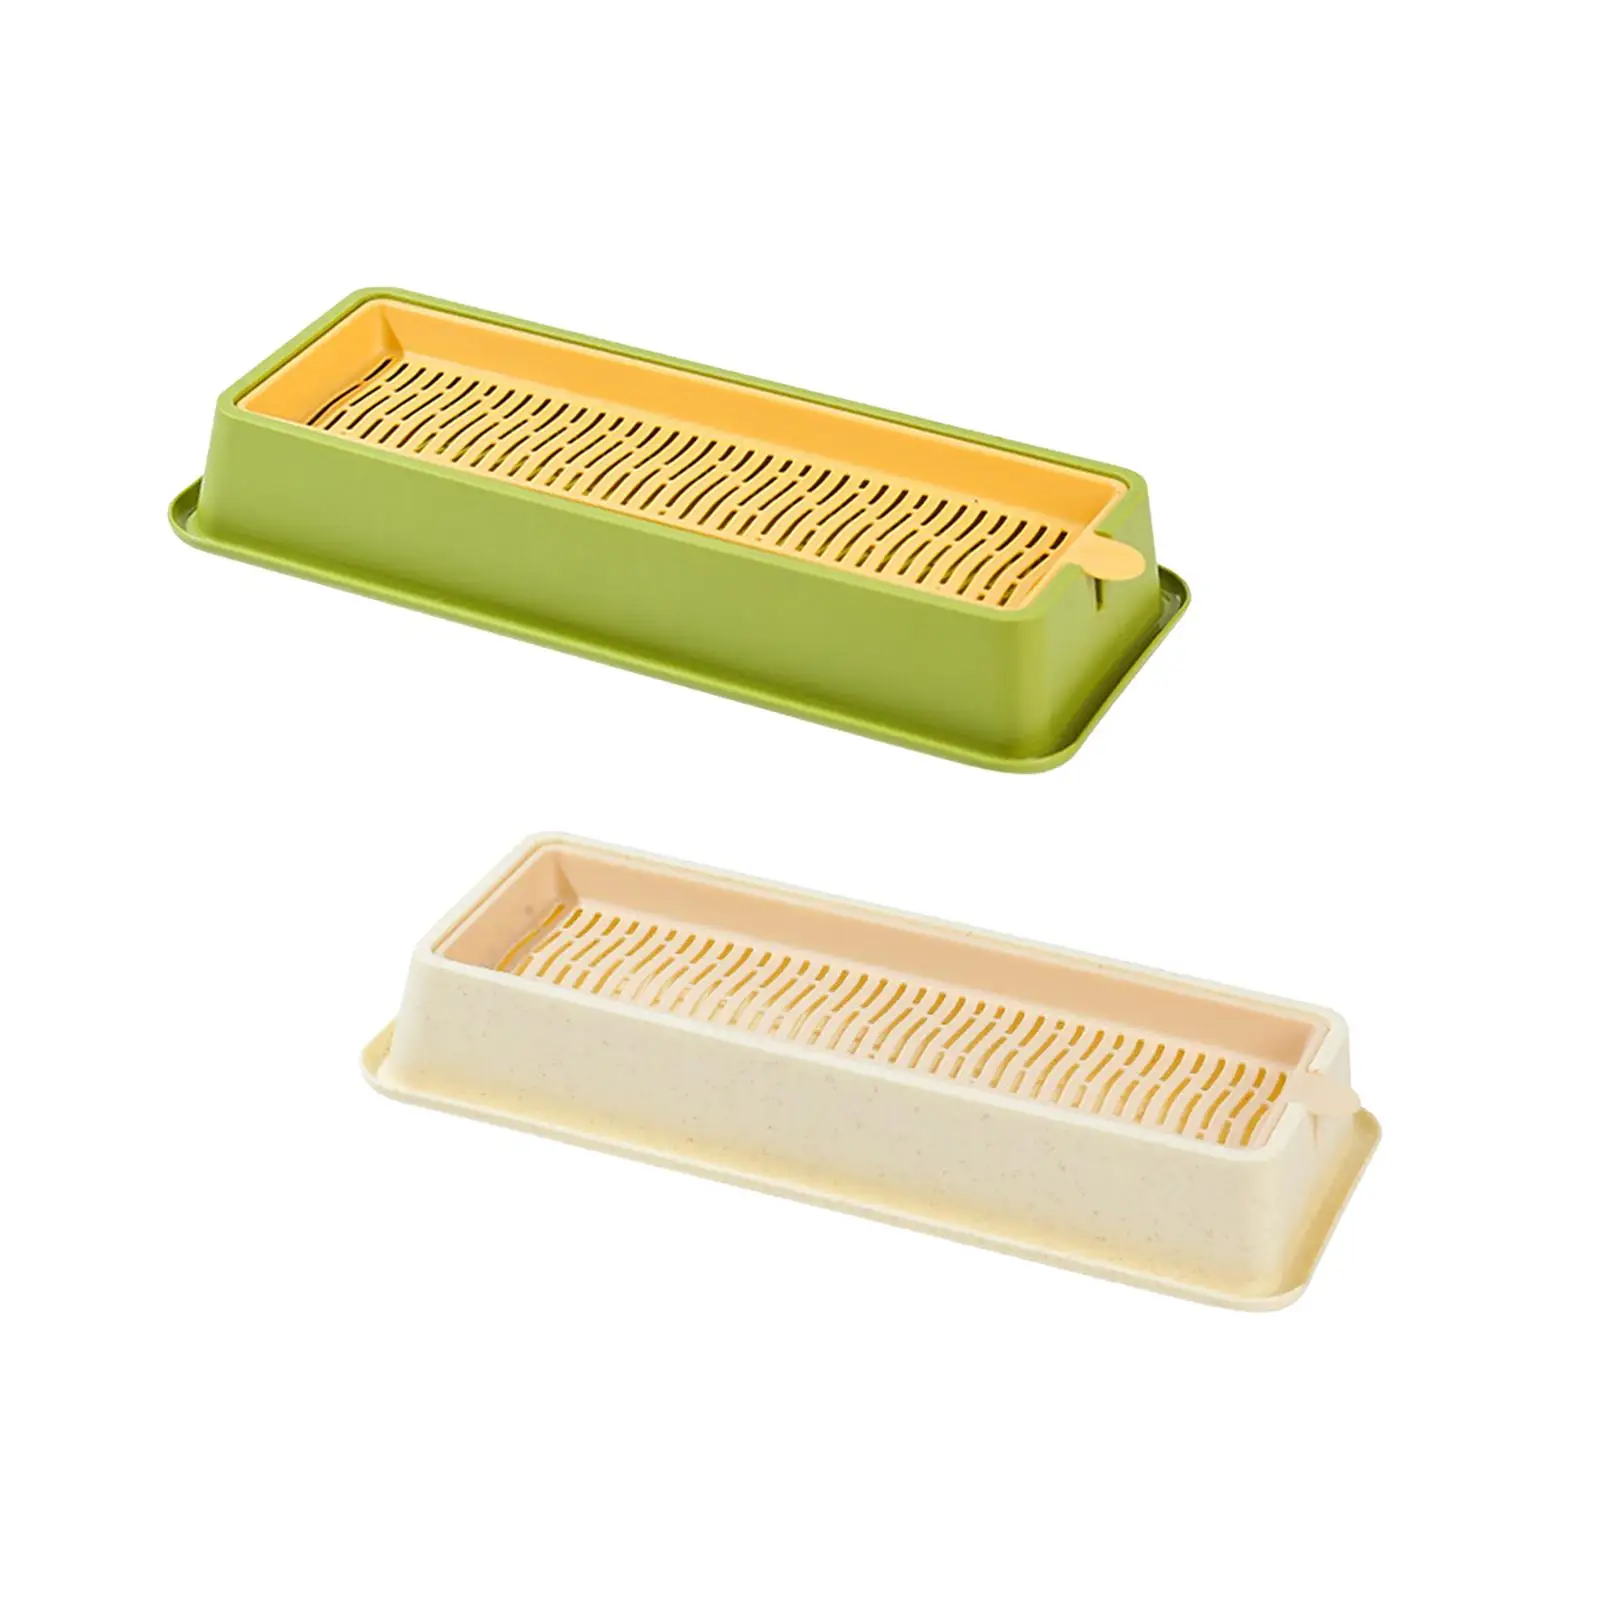 Seed Sprouter Tray Hydroponic Cat Grass Box Catnip Cultivation Box Grass Sprouting Tray for Home Garden Office Microgreens